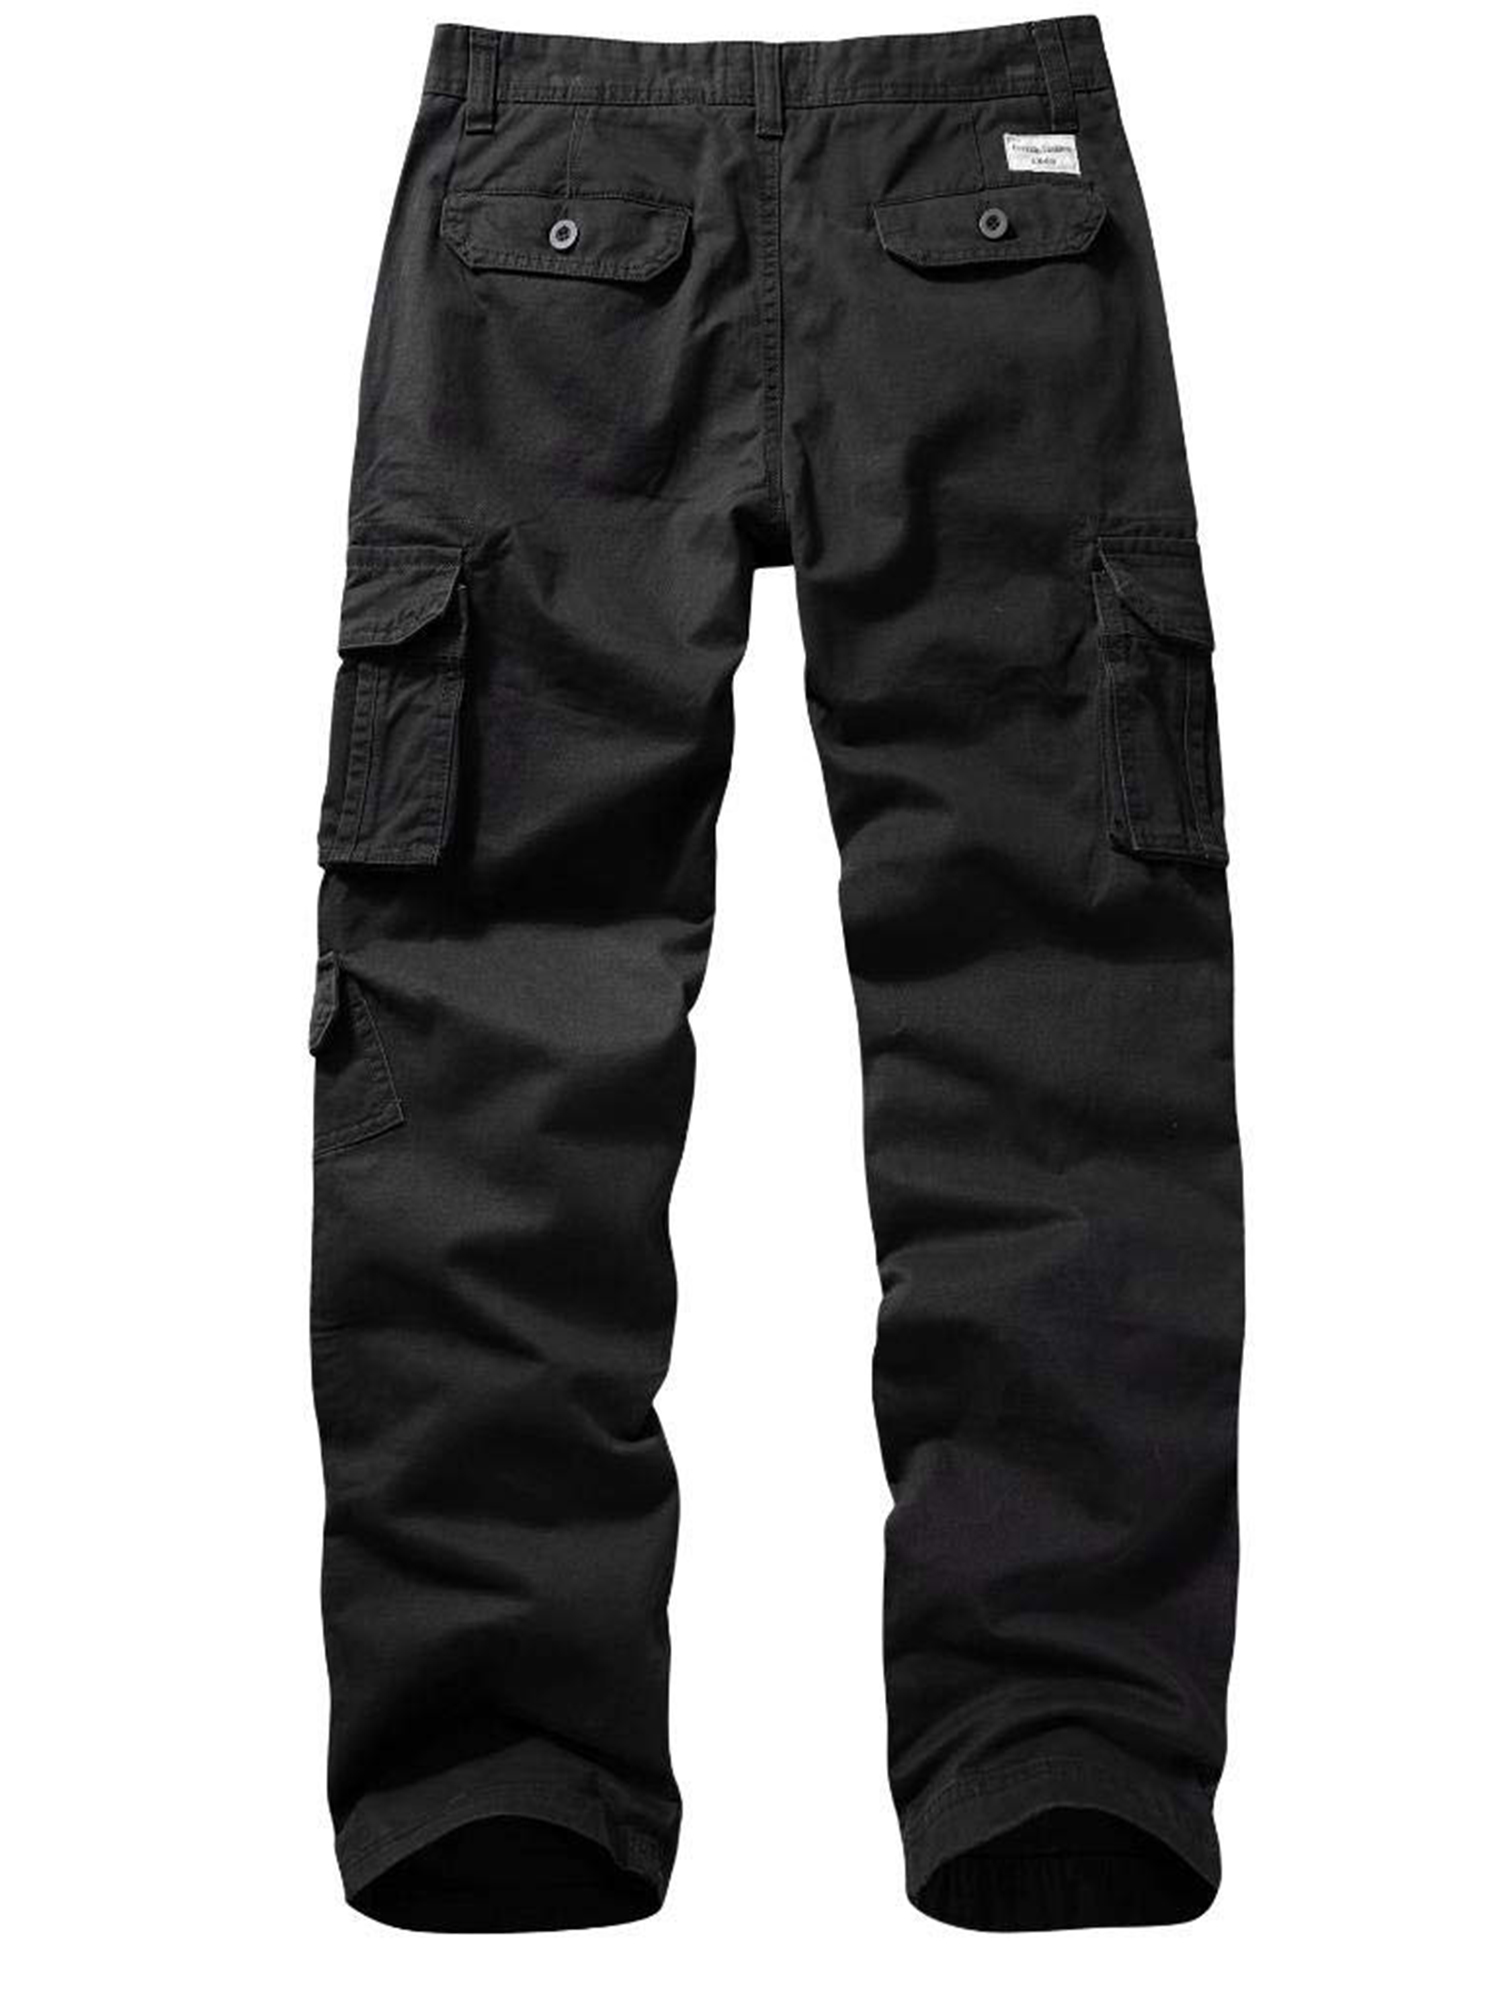 TRGPSG Men's Cargo Pants Outdoor Relaxed Fit Hiking Pants with Multi ...